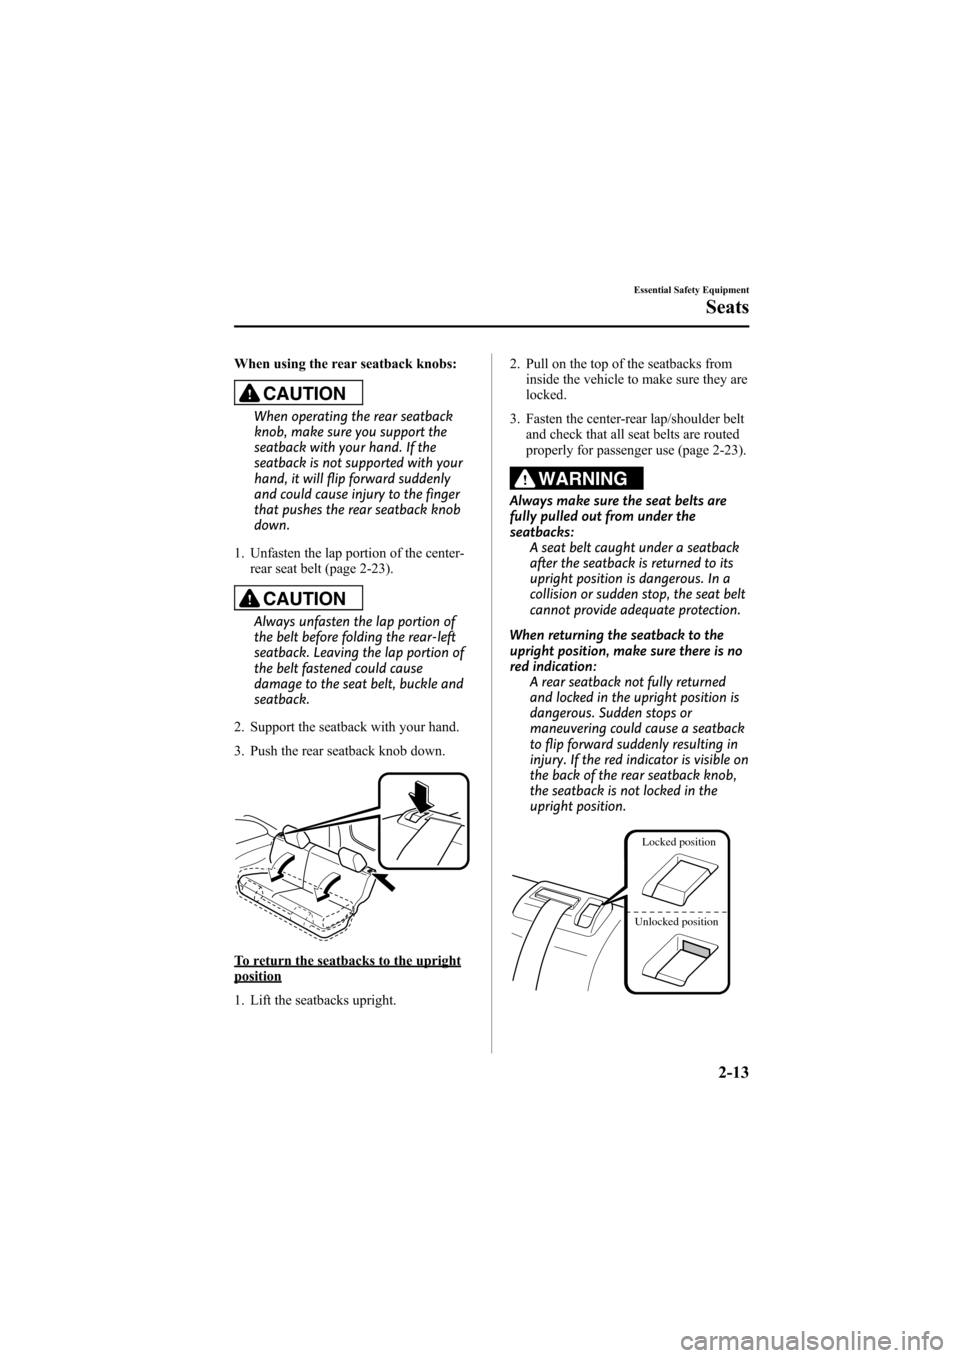 MAZDA MODEL 6 2008   (in English) Owners Manual Black plate (27,1)
When using the rear seatback knobs:
CAUTION
When operating the rear seatback
knob, make sure you support the
seatback with your hand. If the
seatback is not supported with your
hand